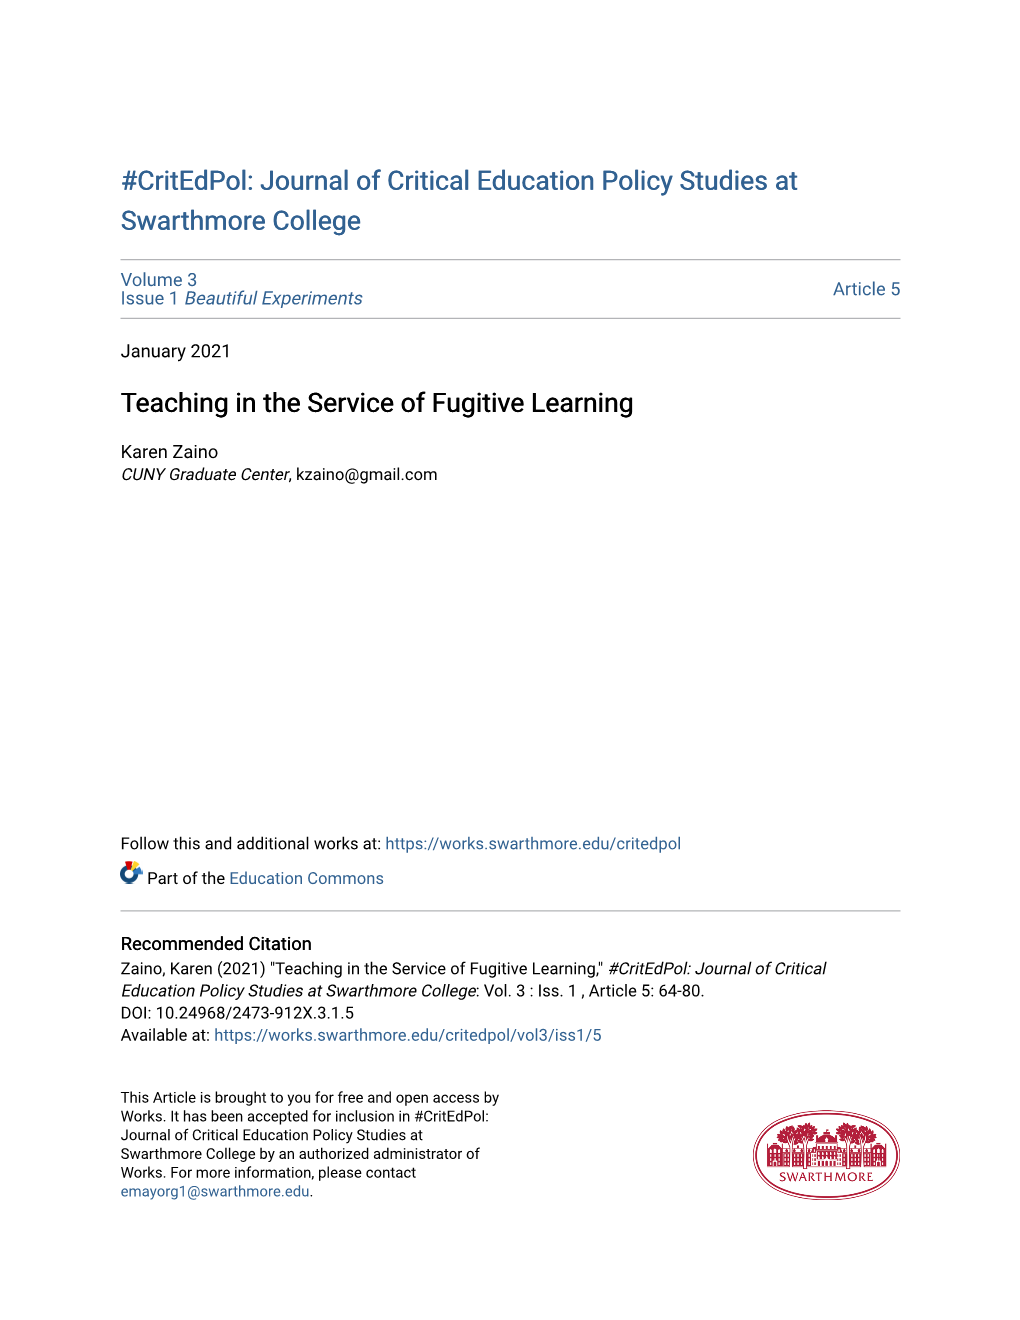 Teaching in the Service of Fugitive Learning